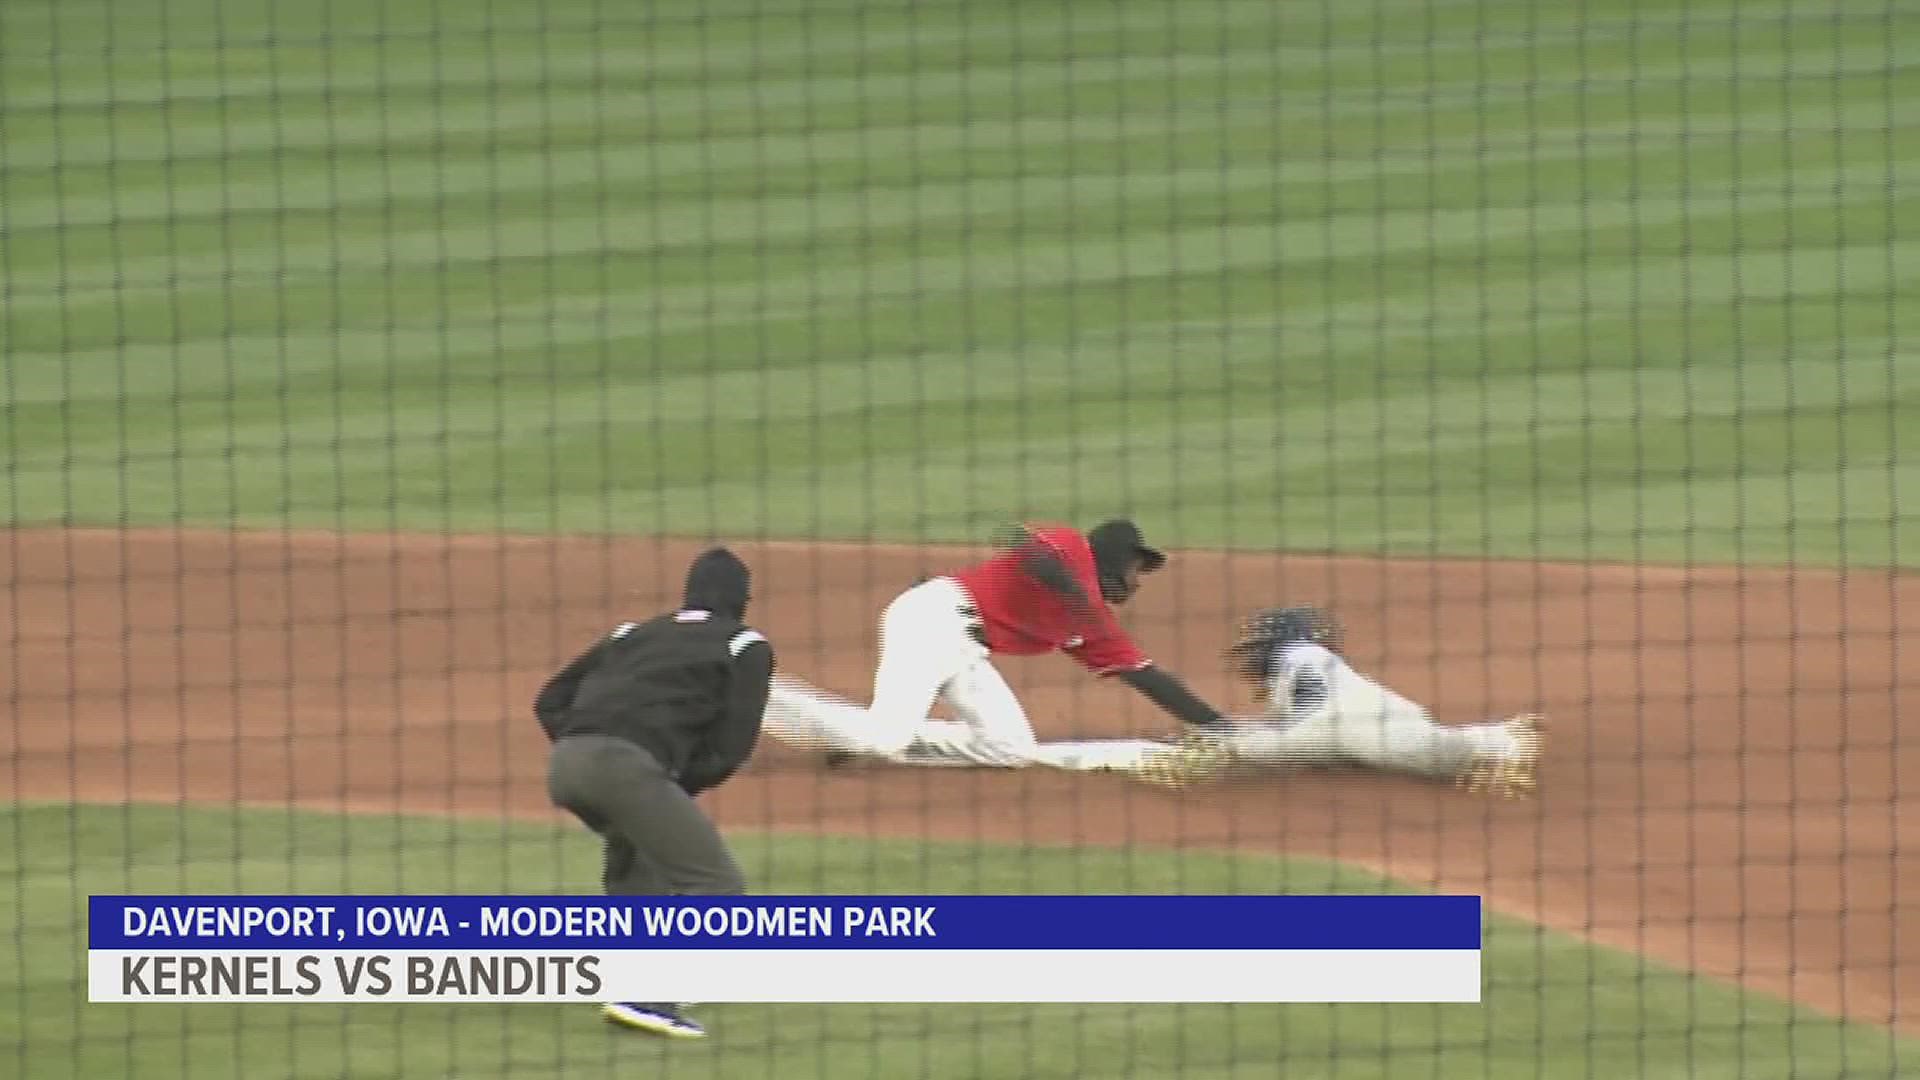 The River Bandits launched two homers and totaled nine hits to beat the Kernels on Friday night at Modern Woodmen Park.